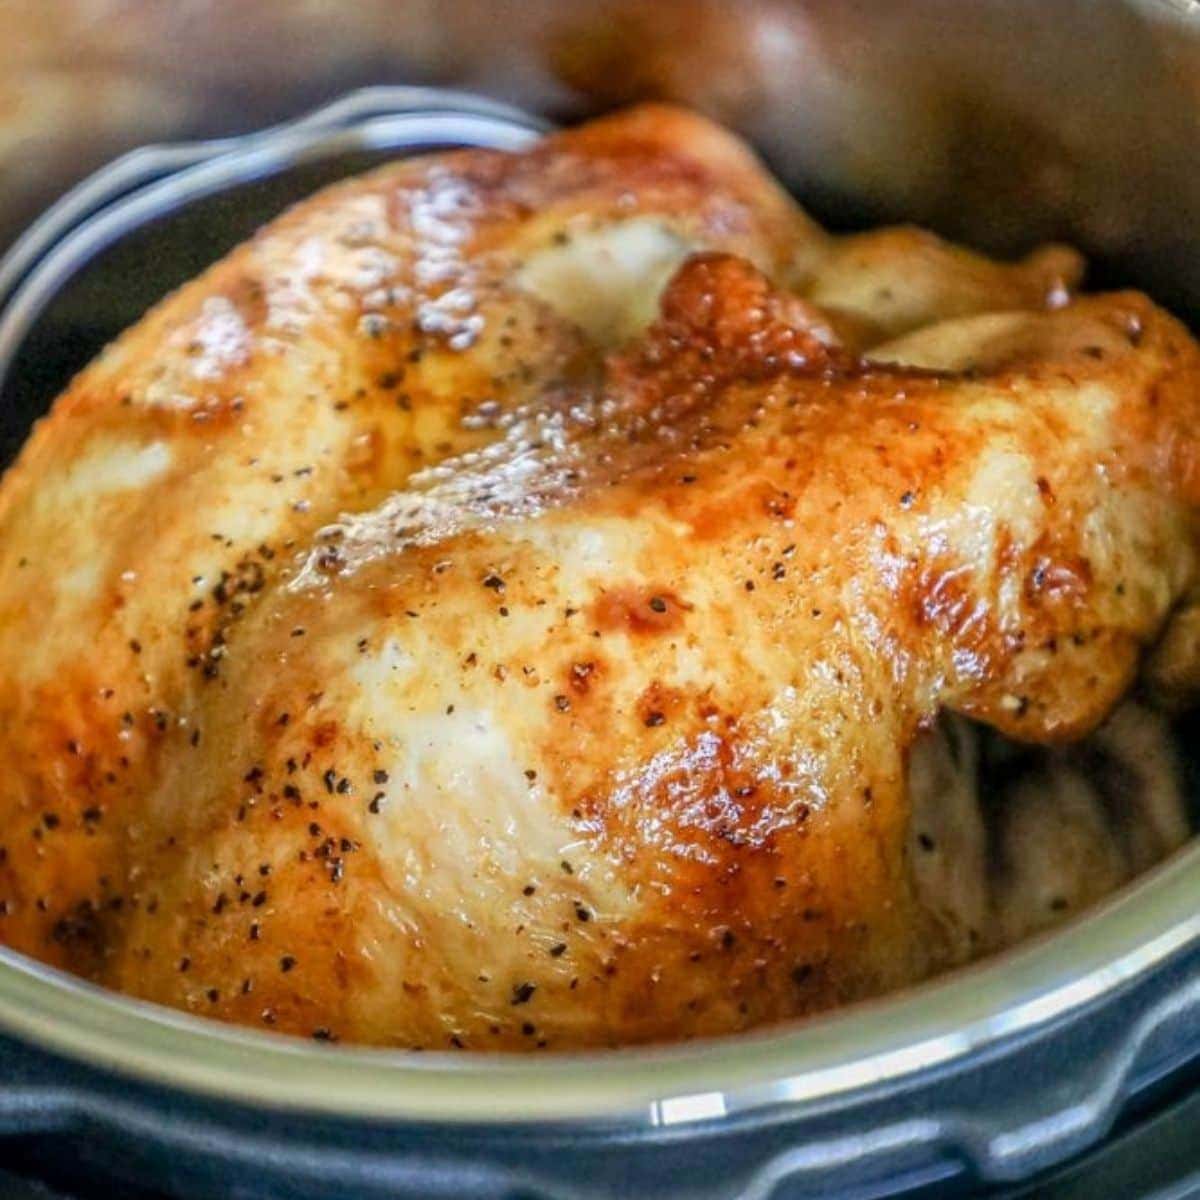 https://sweetcsdesigns.com/wp-content/uploads/2021/11/instant-pot-roasted-turkey-Recipe-Picture.jpg